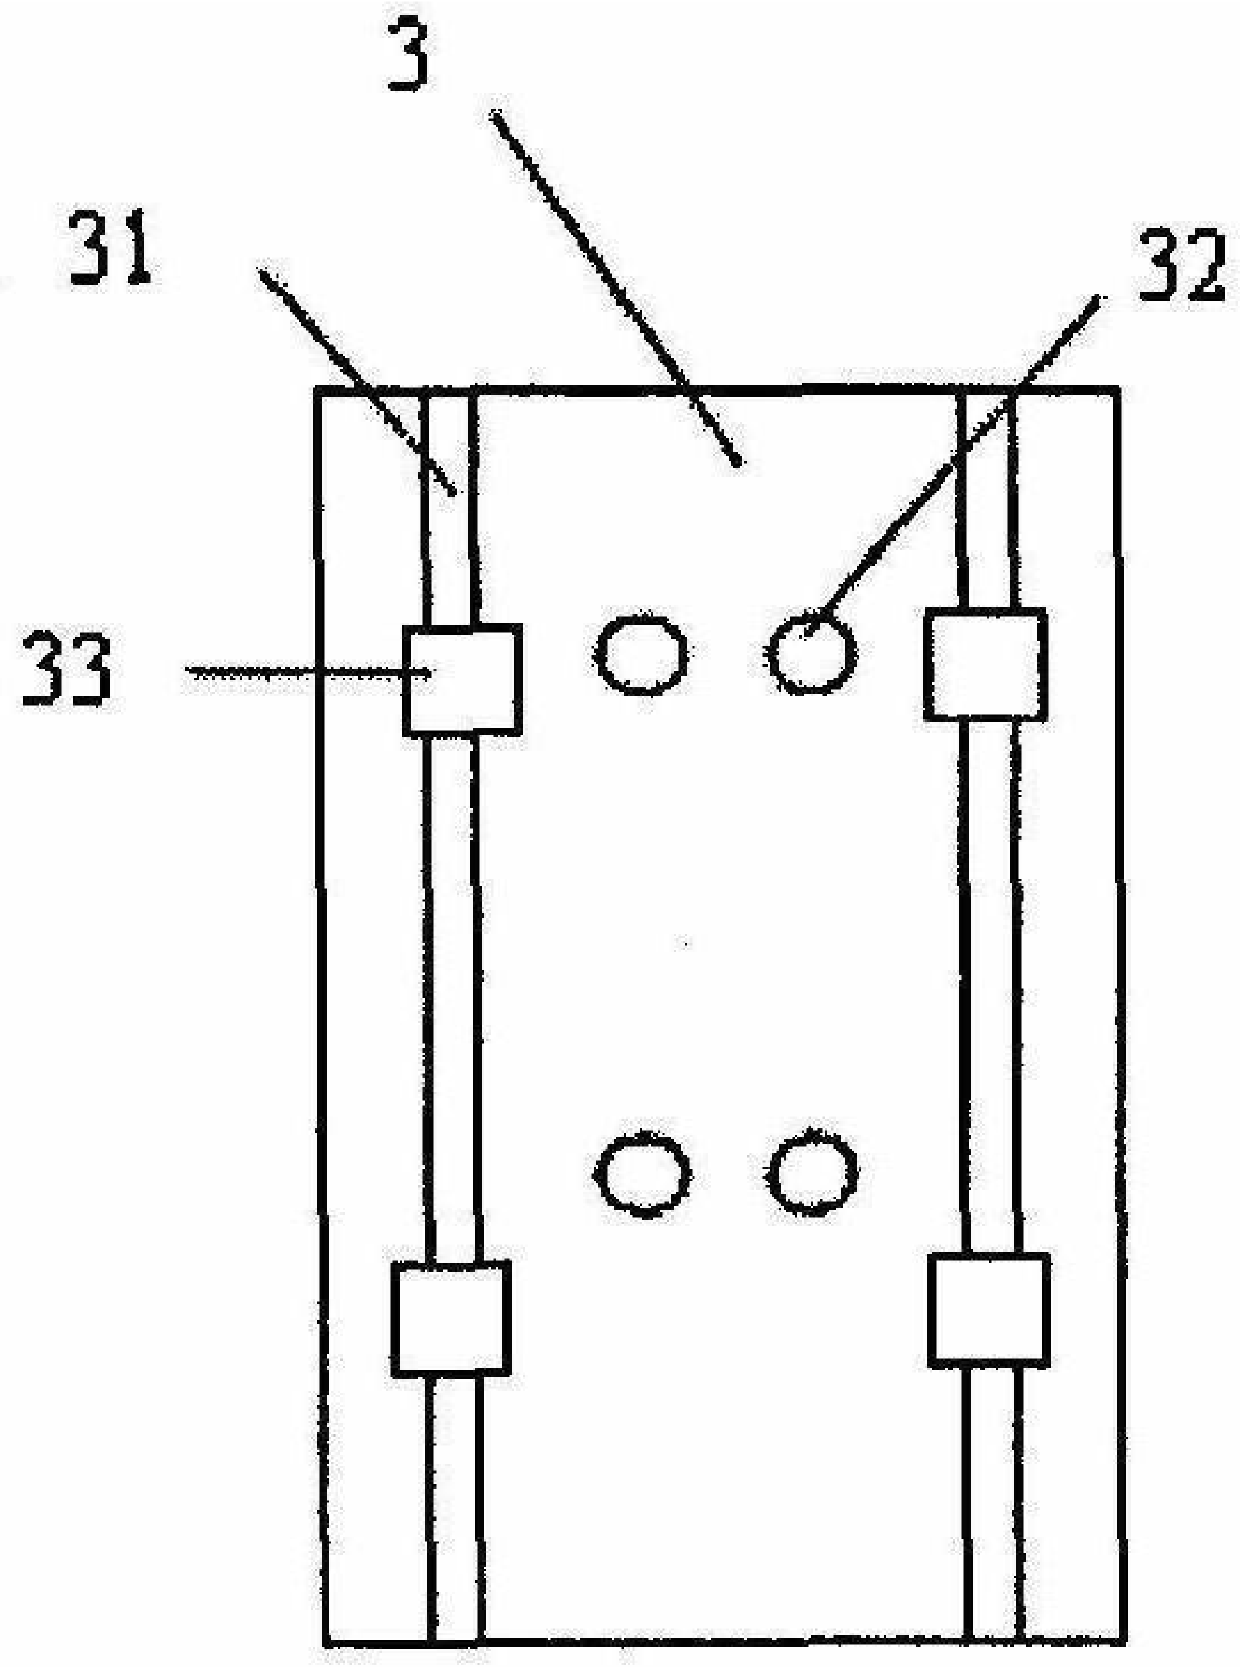 A device for simultaneously mounting curved surface loads and plane loads